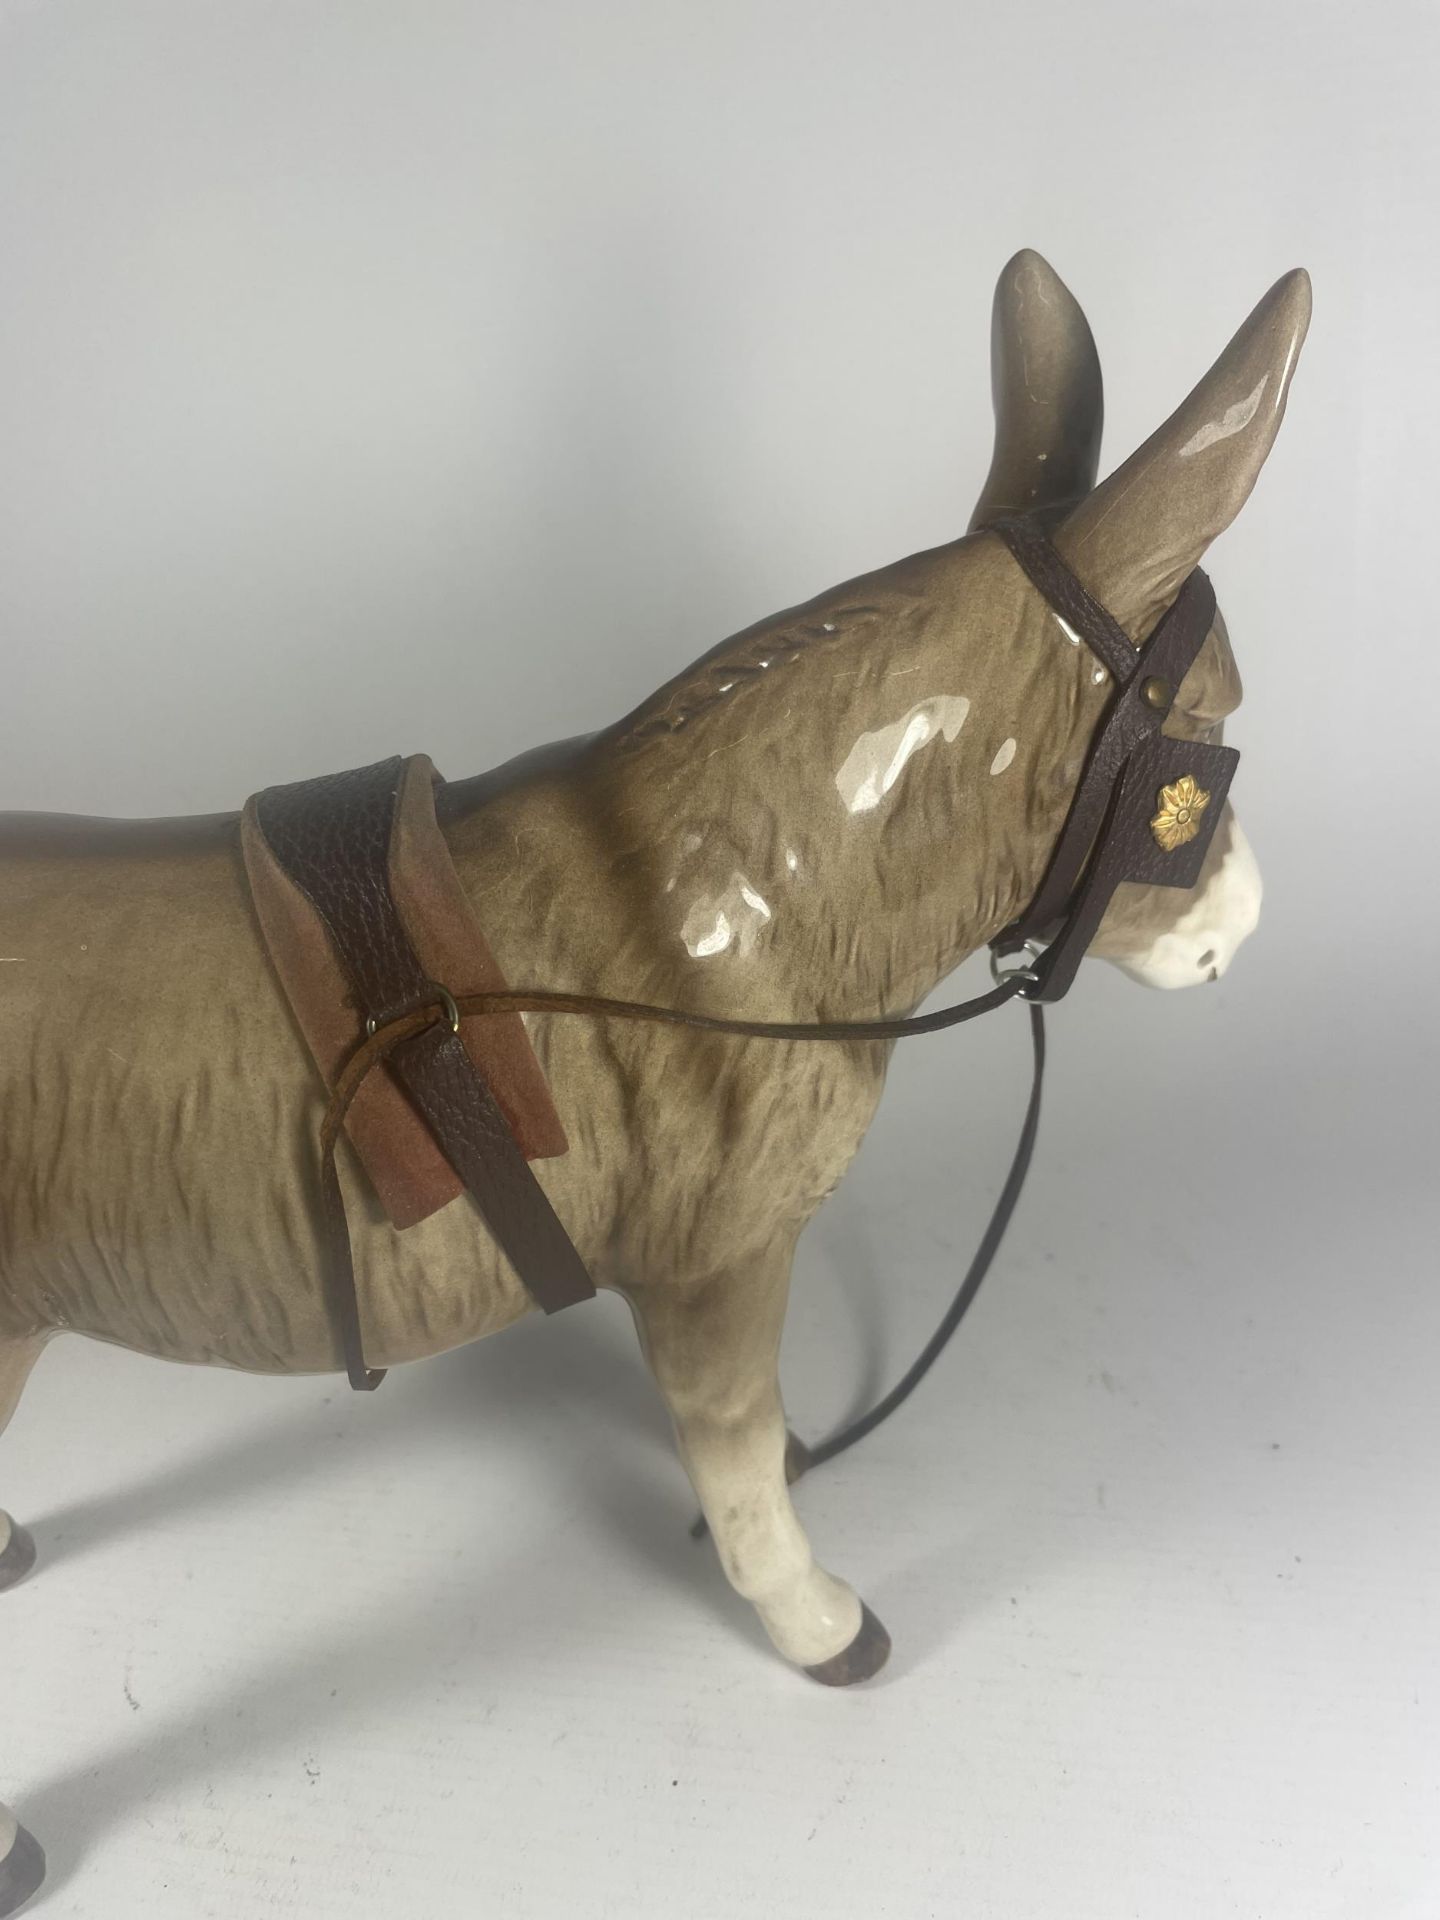 A SYLVAC DONKEY FIGURE WITH LEATHER REIGNS - Image 3 of 4